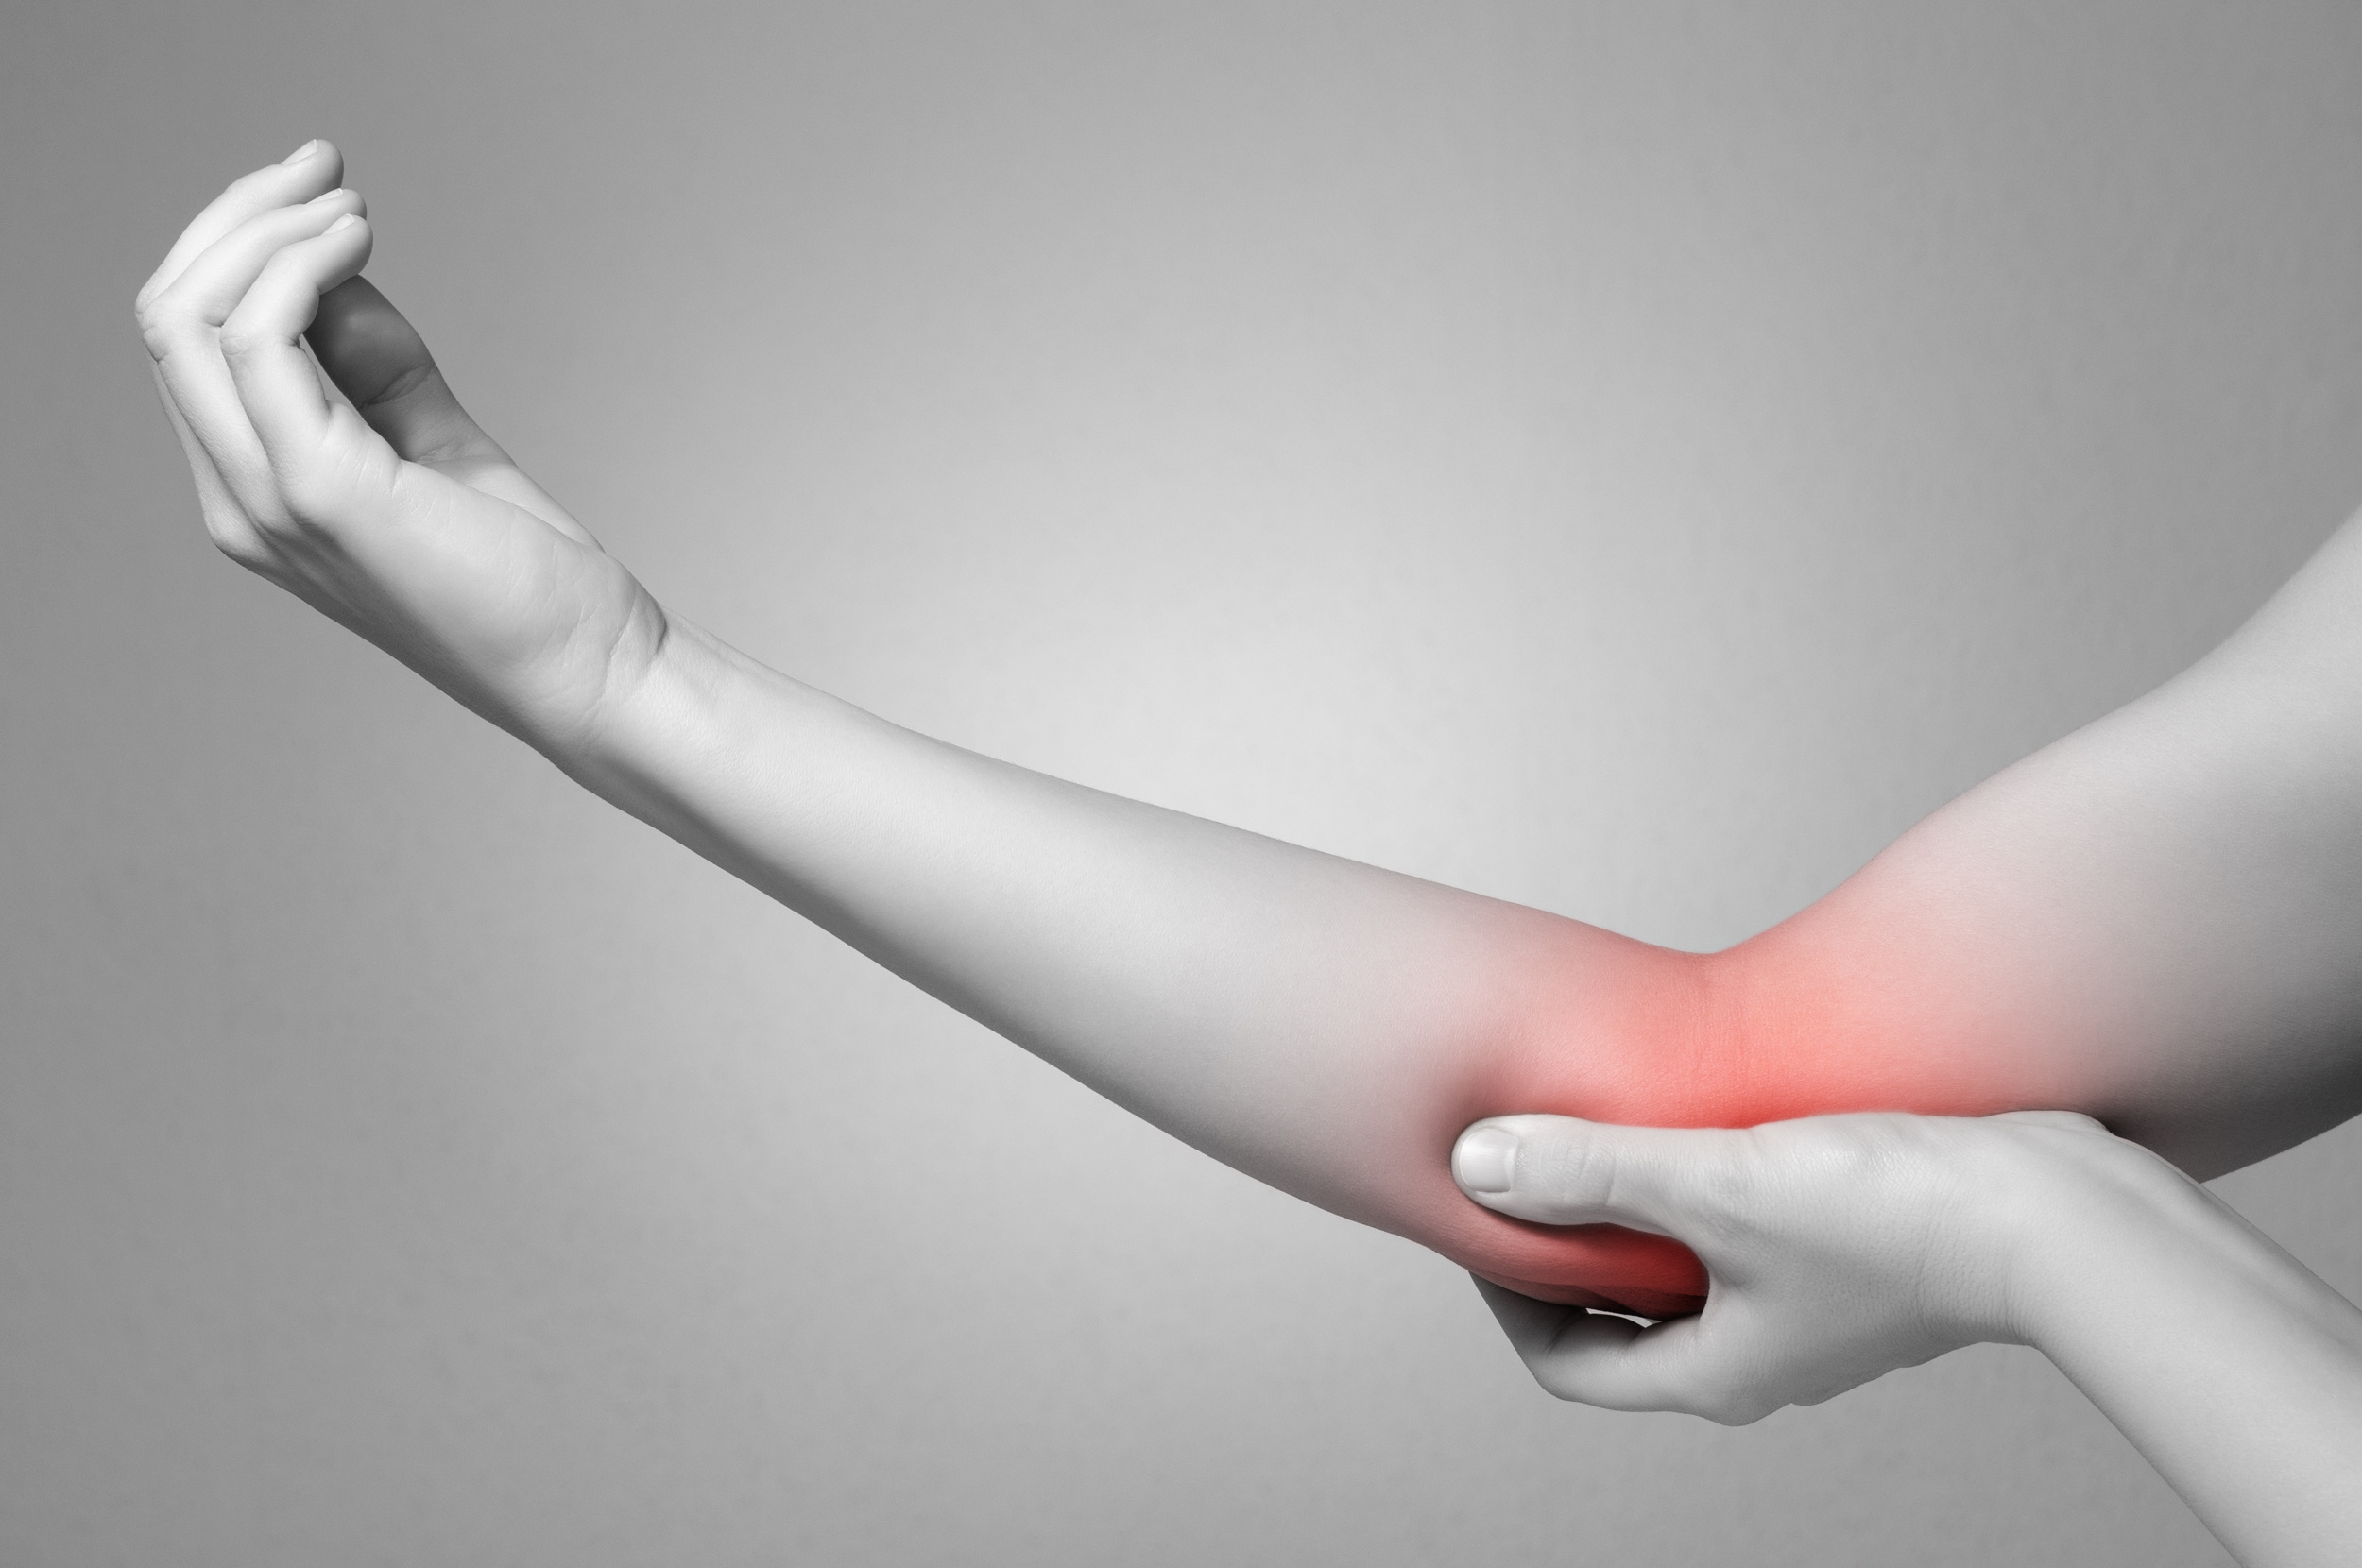 Trigger Point Therapy - Cubital Tunnel Syndrome, Cubital Tunnel Syndrome,  Elbow and more